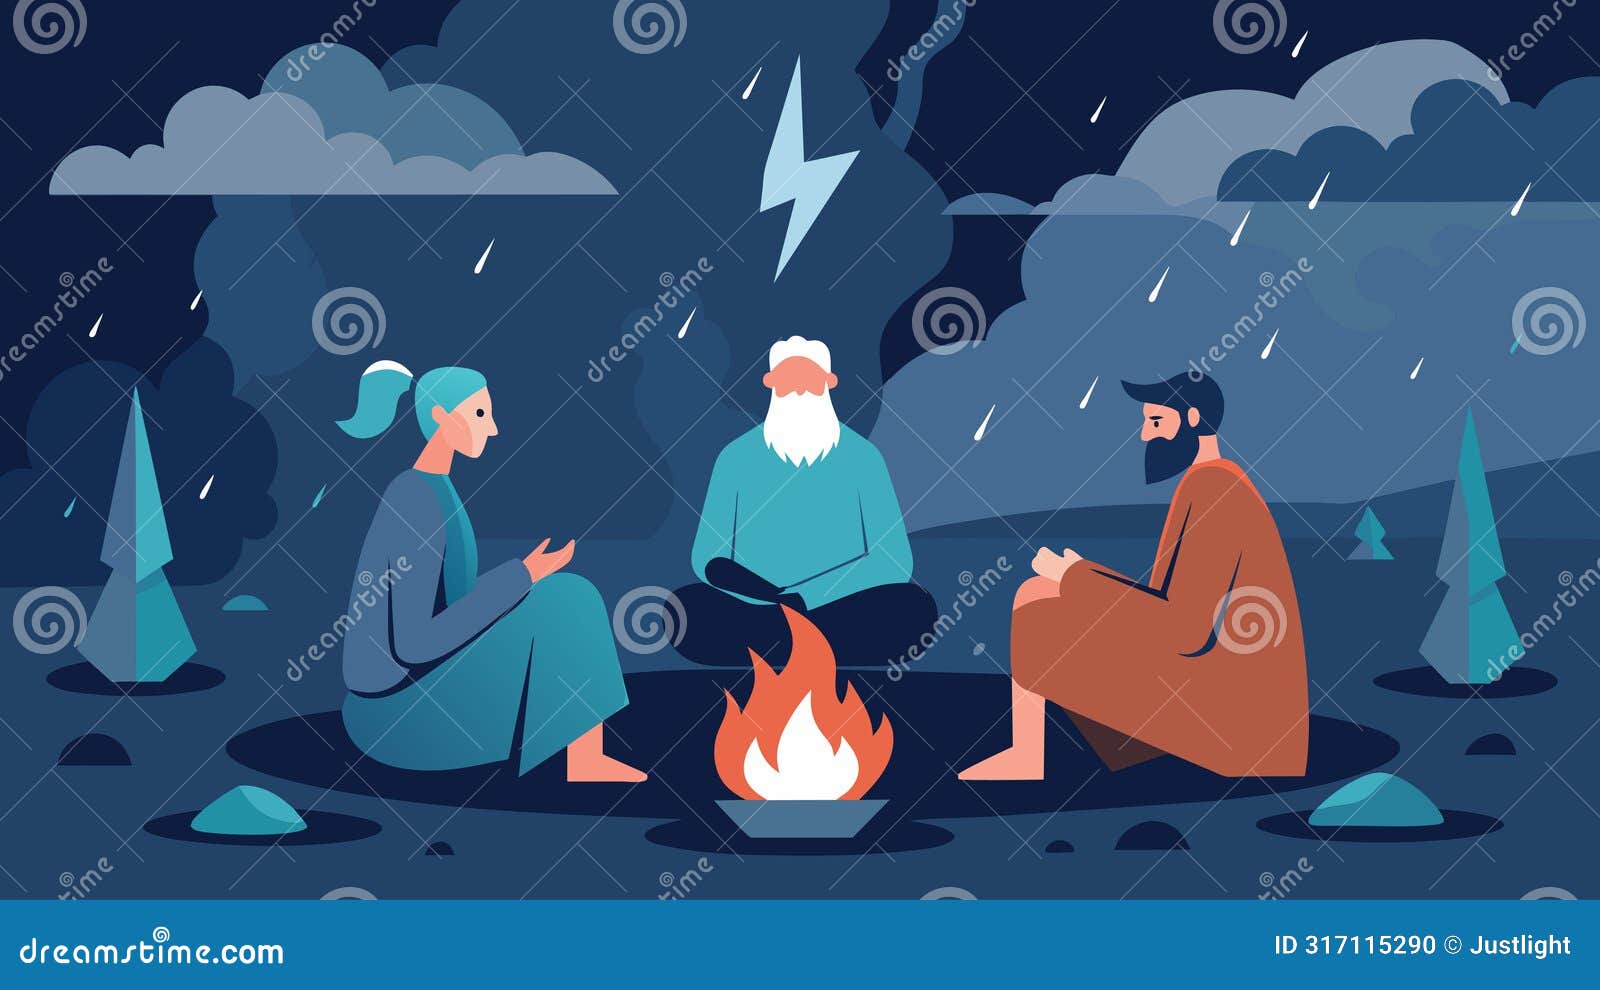 as a storm rages outside a group of philosophers sit by a fireplace deep in thought as they contemplate the turbulent